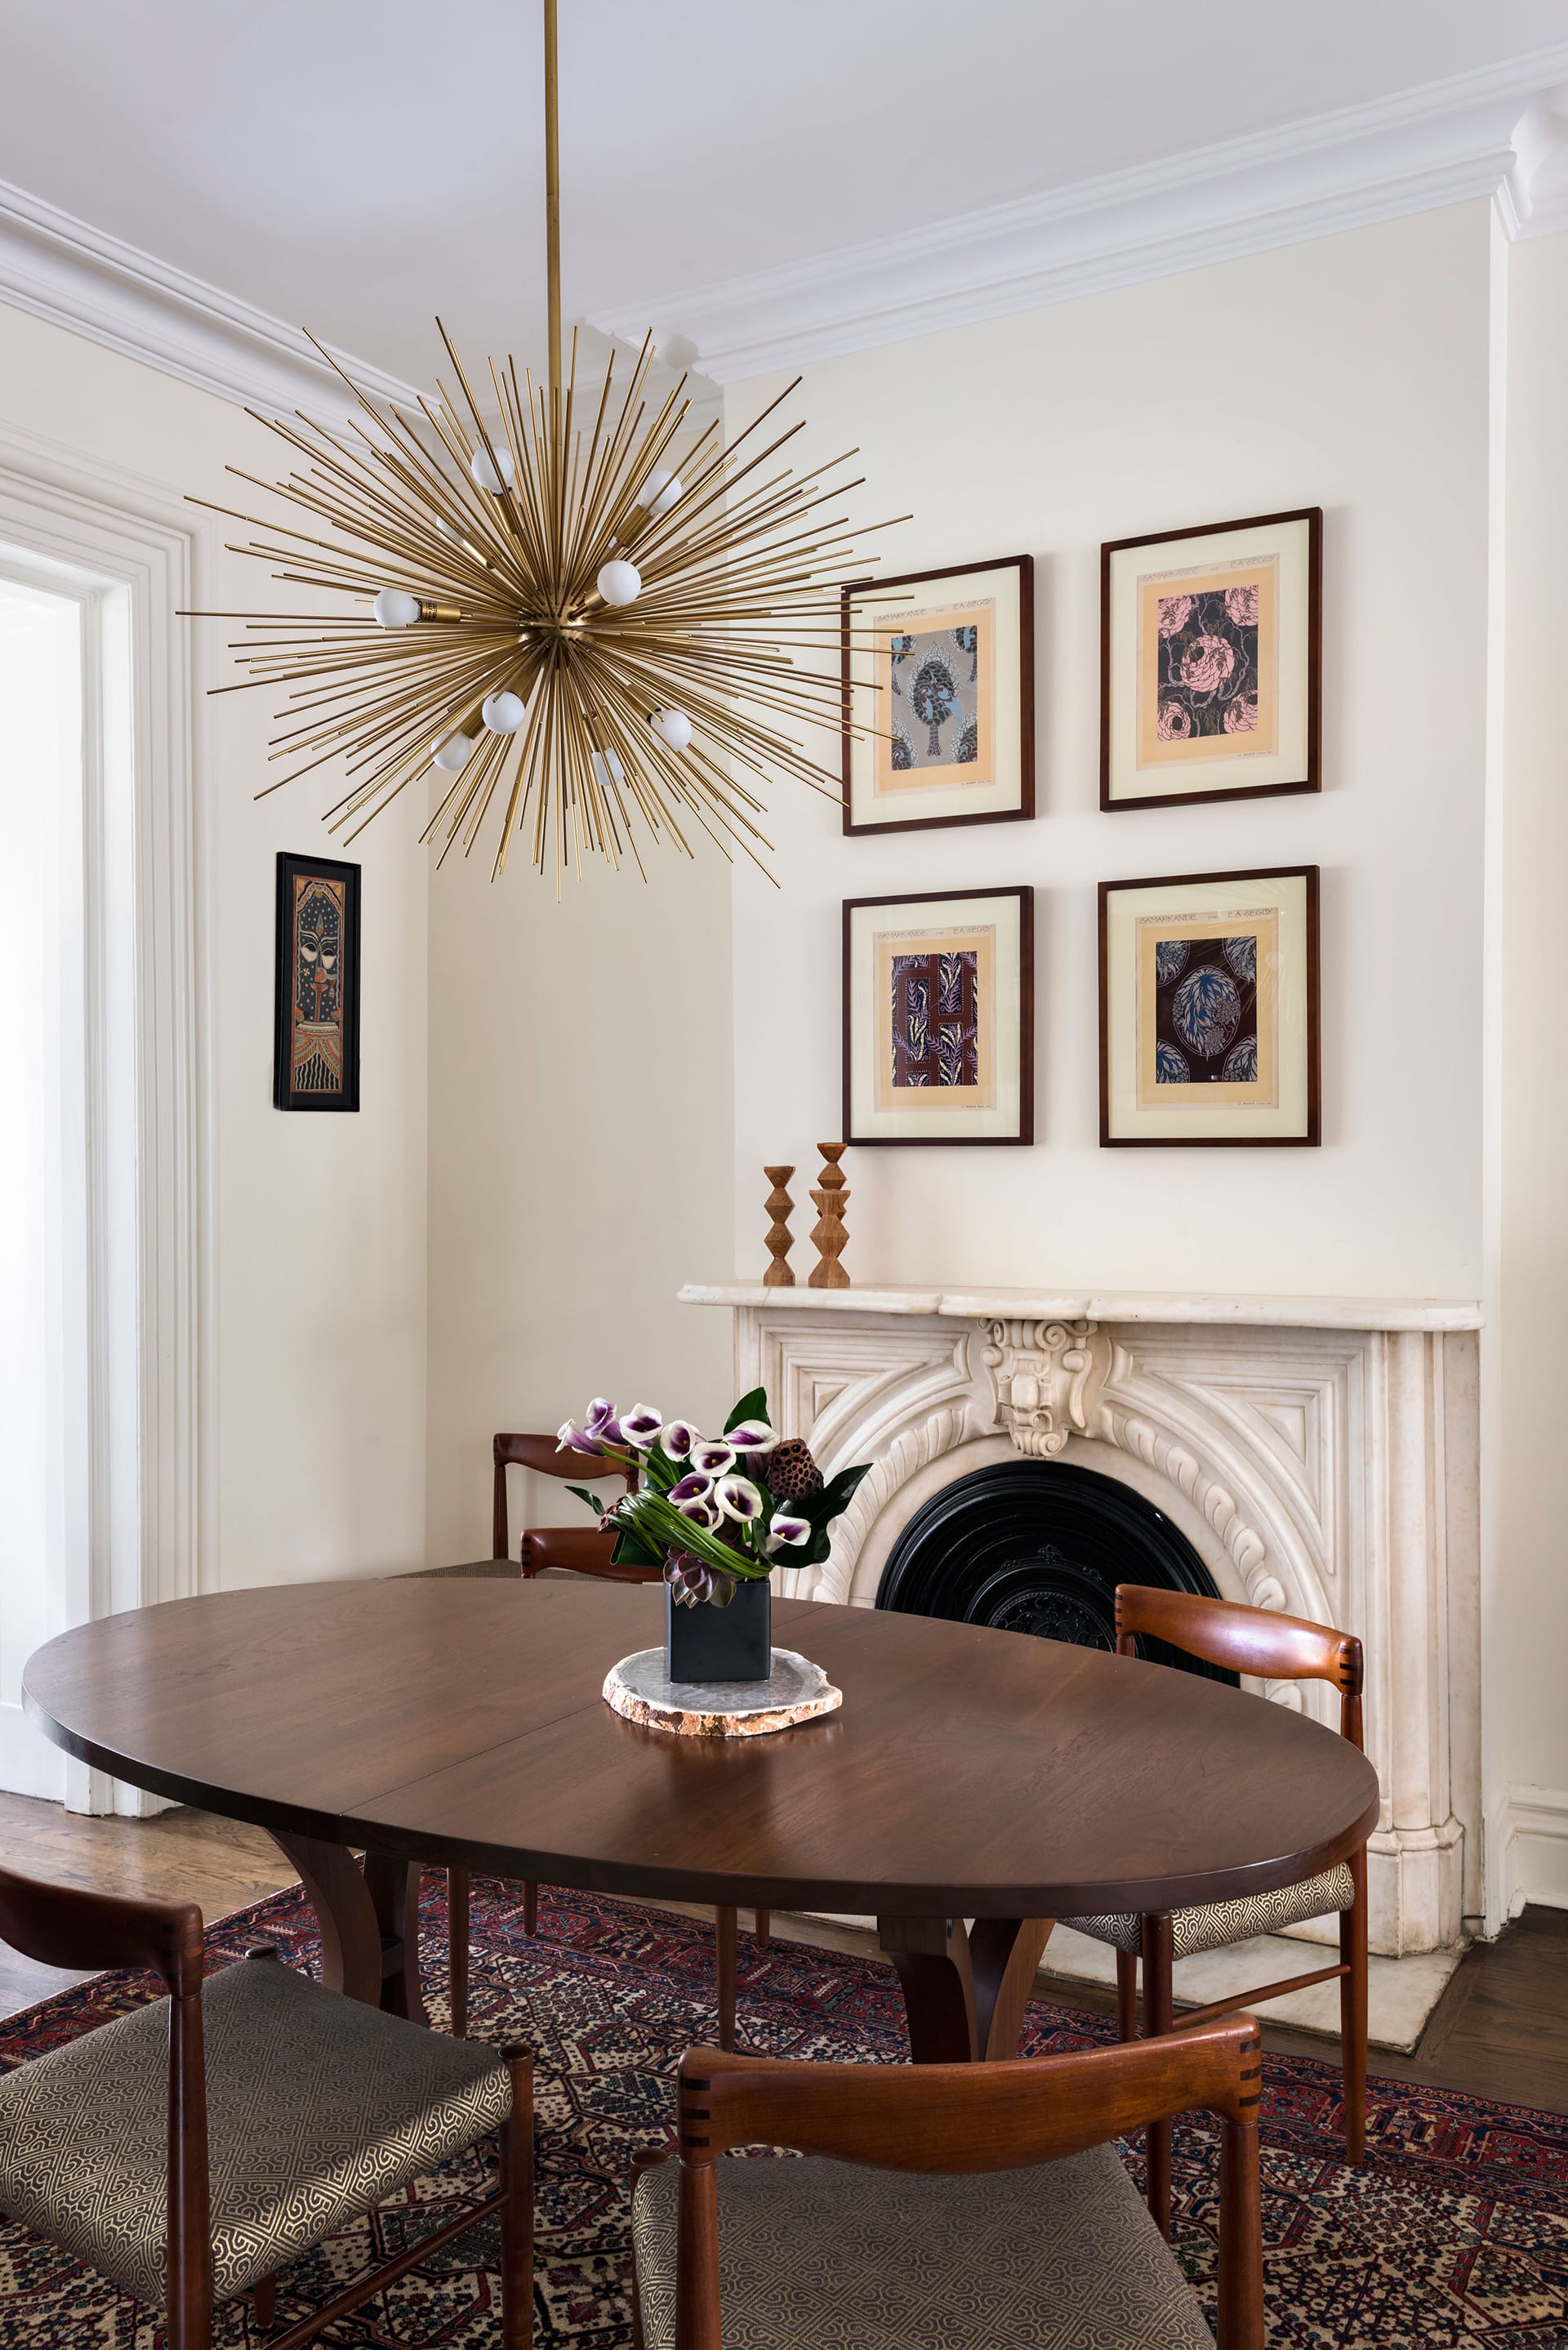 Dining room with a restored fireplace, statement chandelier, and dark wood table